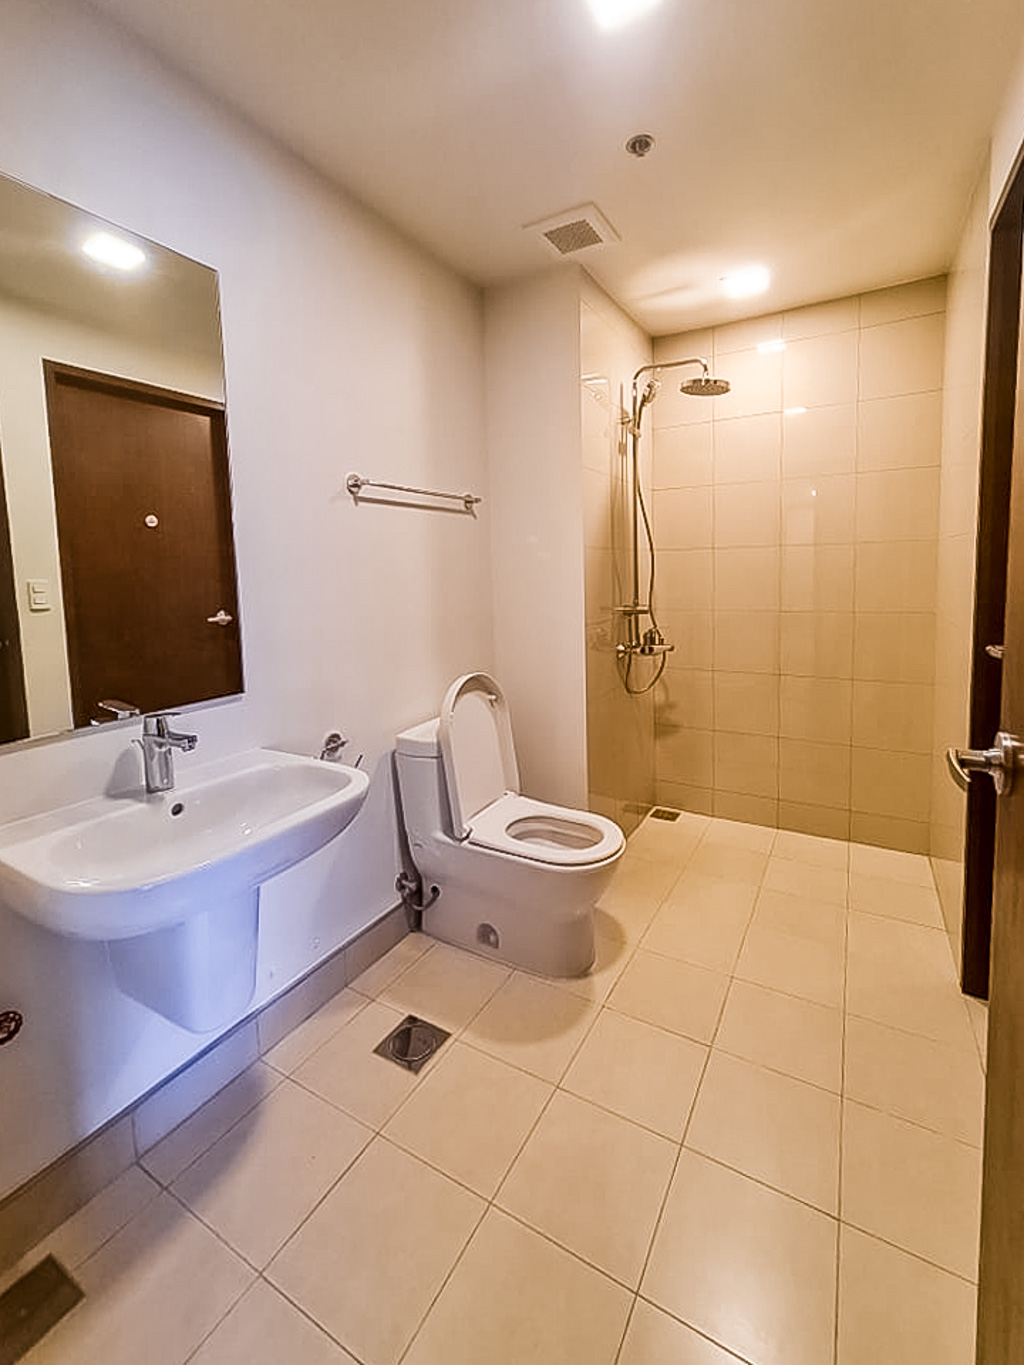 RCALC16 Unfurnished 2 Bedroom Condo for Rent in Cebu Business Park - 5